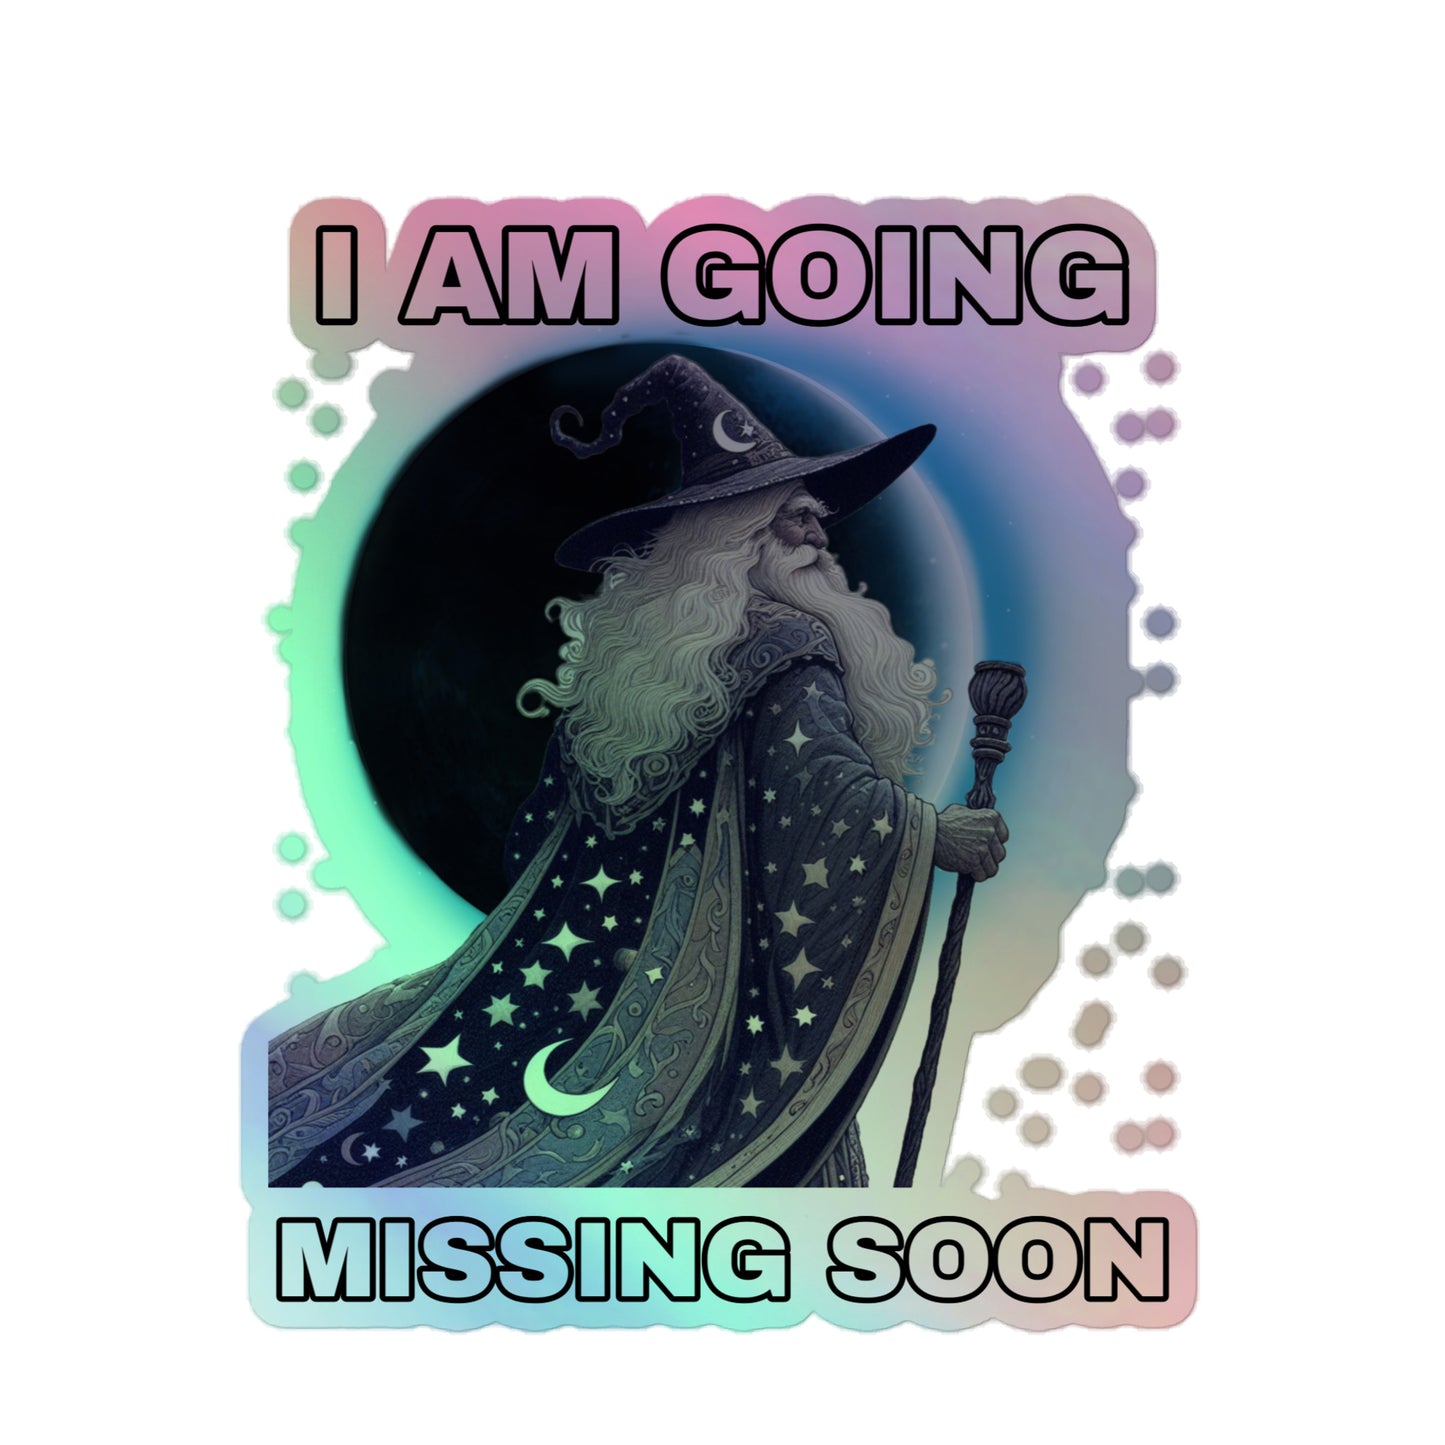 I am going missing soon (sticker)